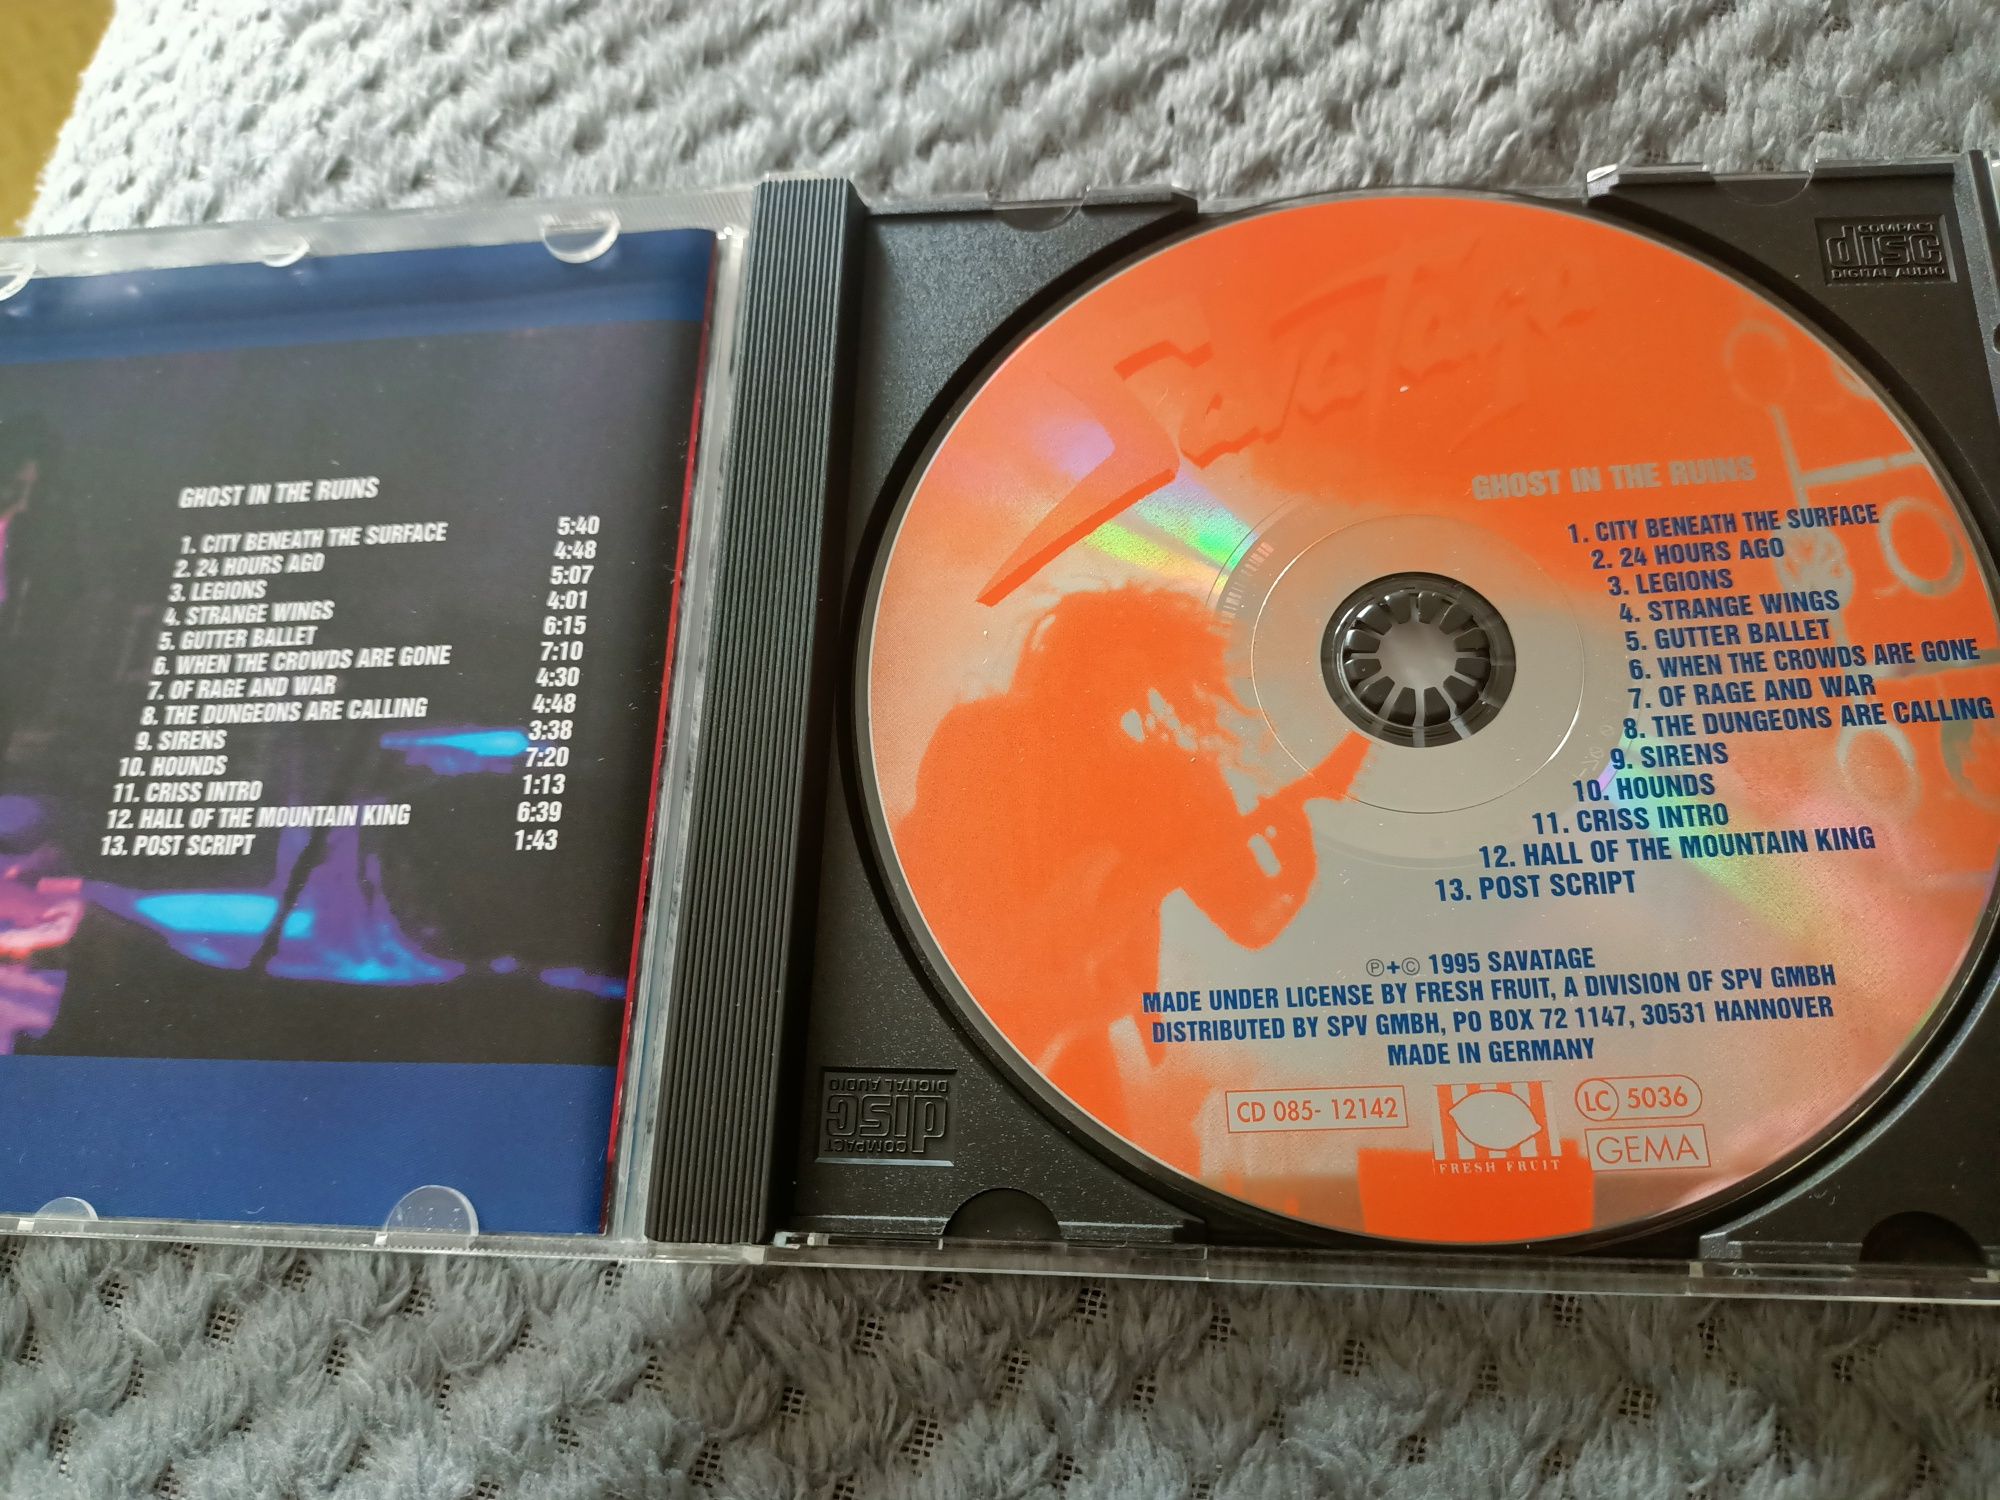 Savatage - Ghost In The Ruins - A Tribute To Criss Oliva - (CD, Album)